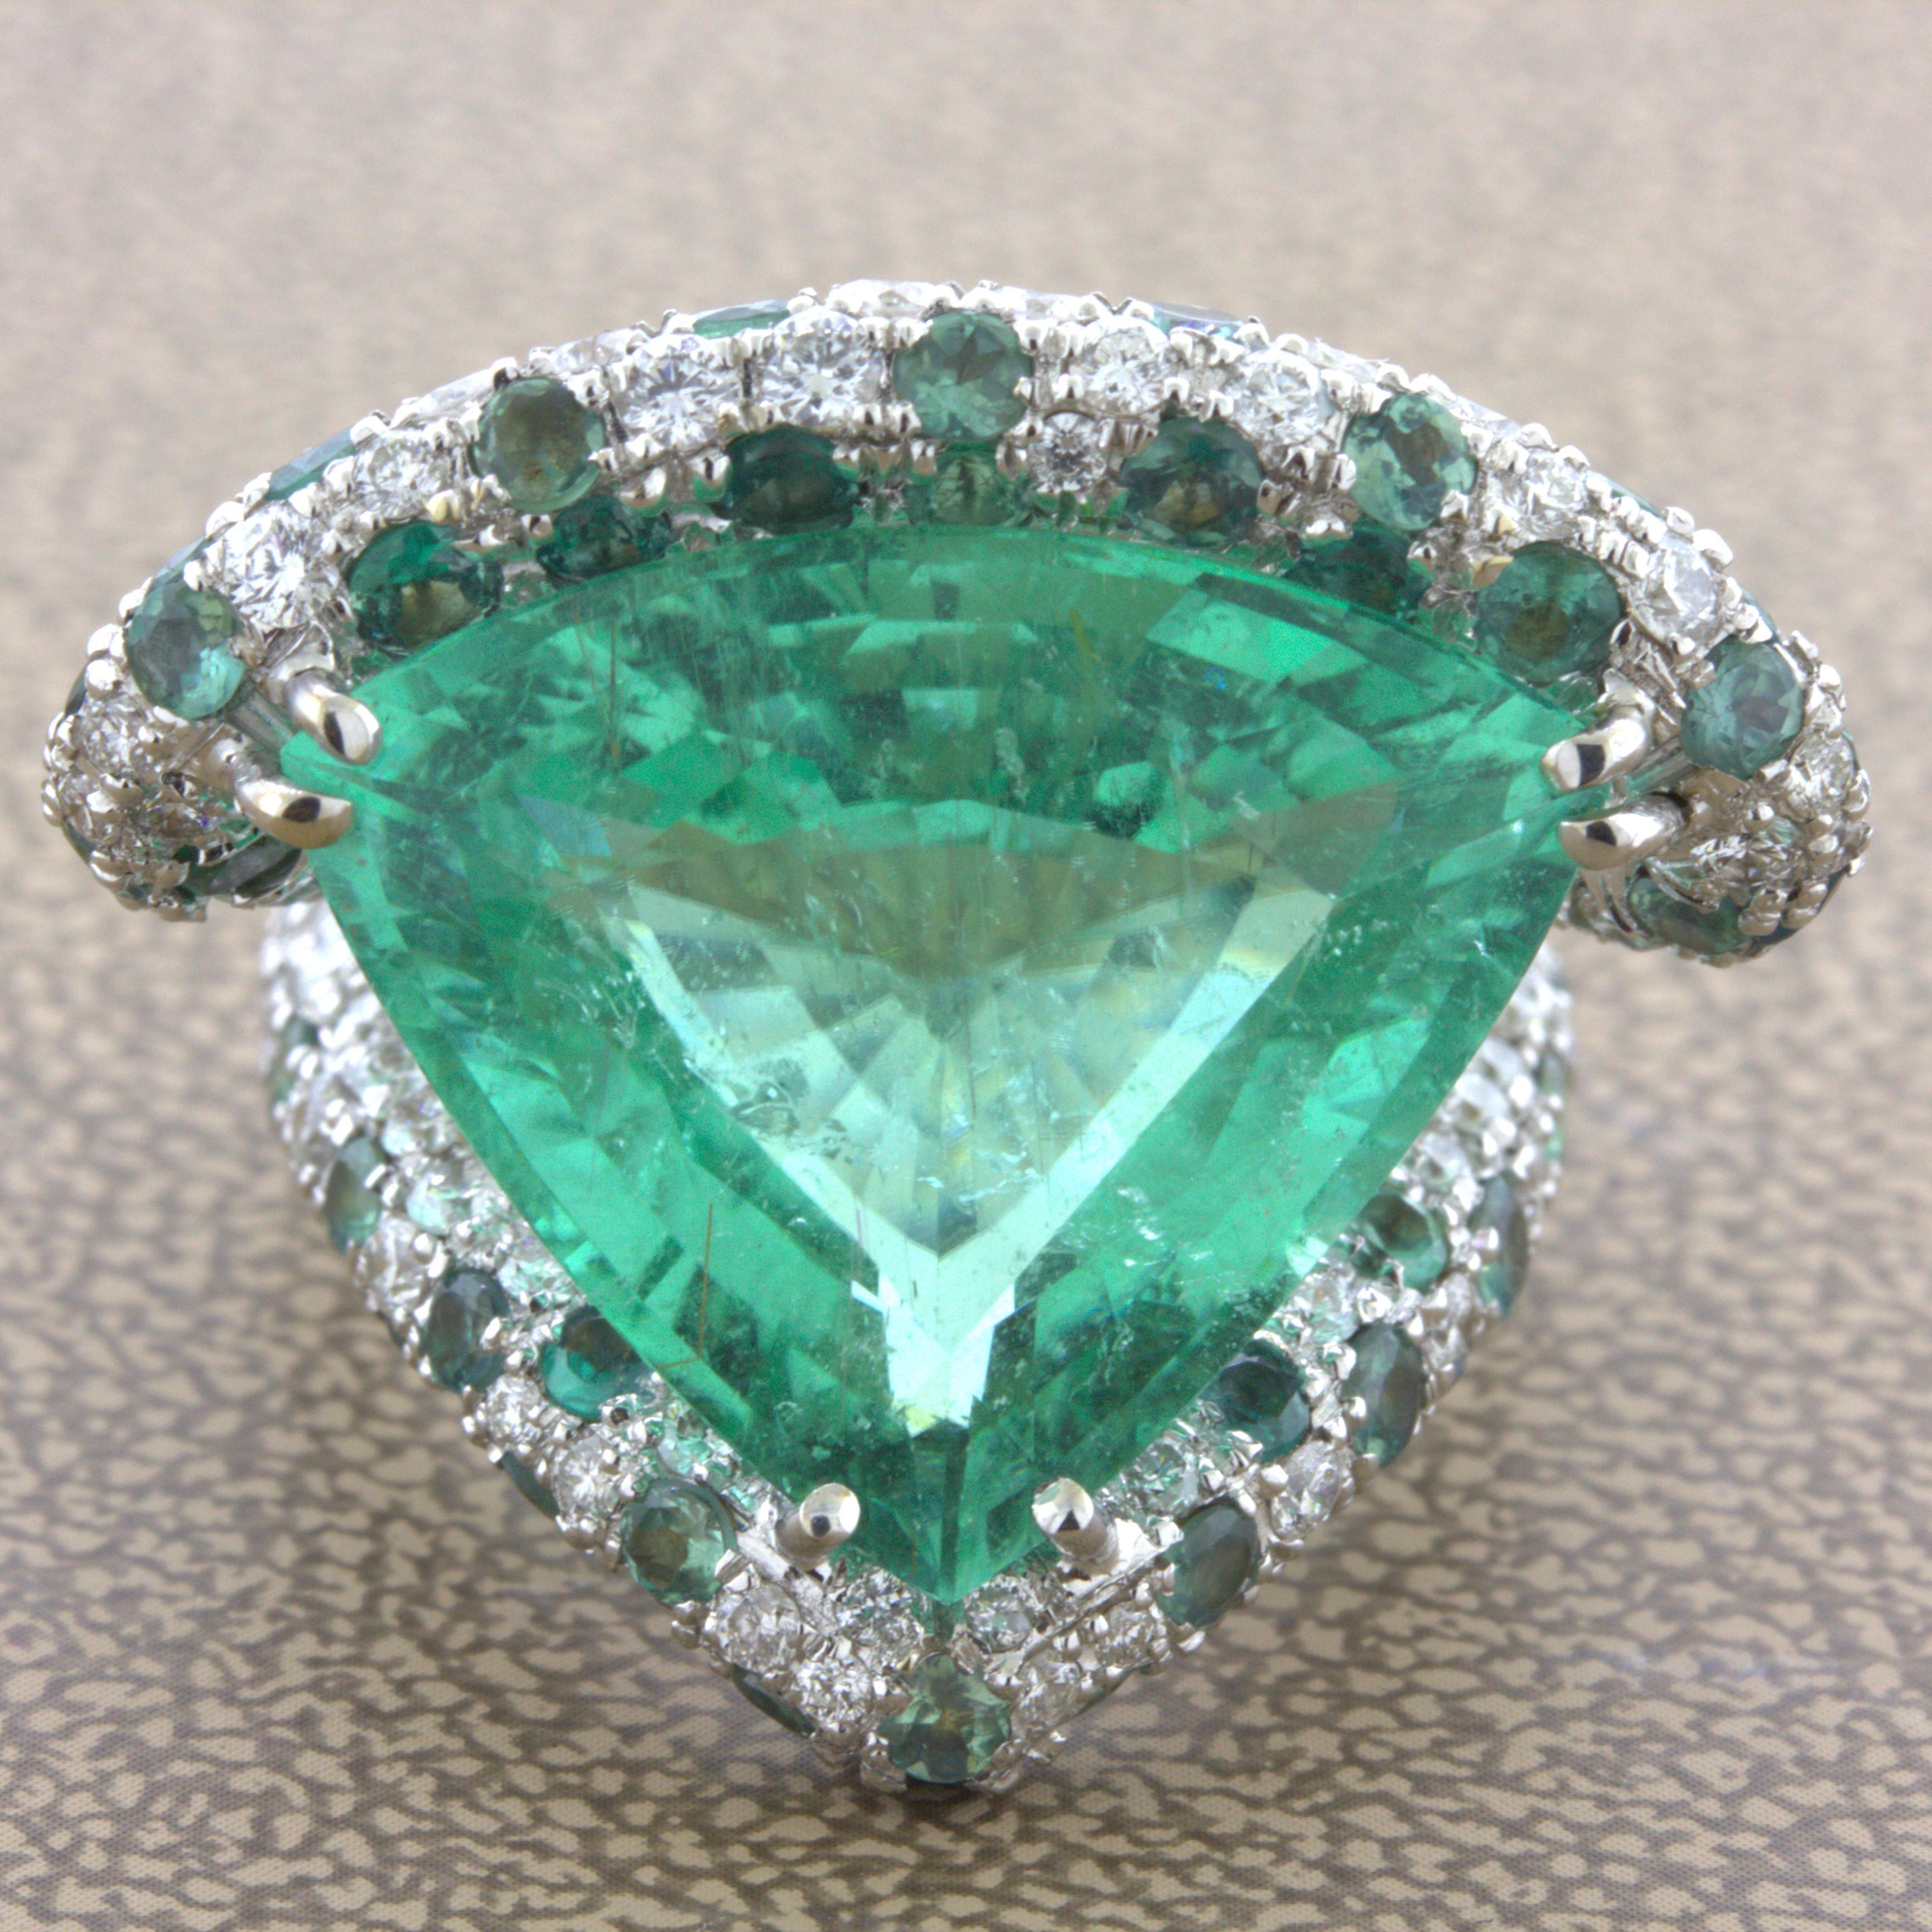 An extremely rare and unique gemstone, not only for its variety but also for its size and shape. The fine gem Paraiba weighs an impressive 28.41 carats and has a distinctive triangular shape which really sets it apart. It has a glowing vibrant